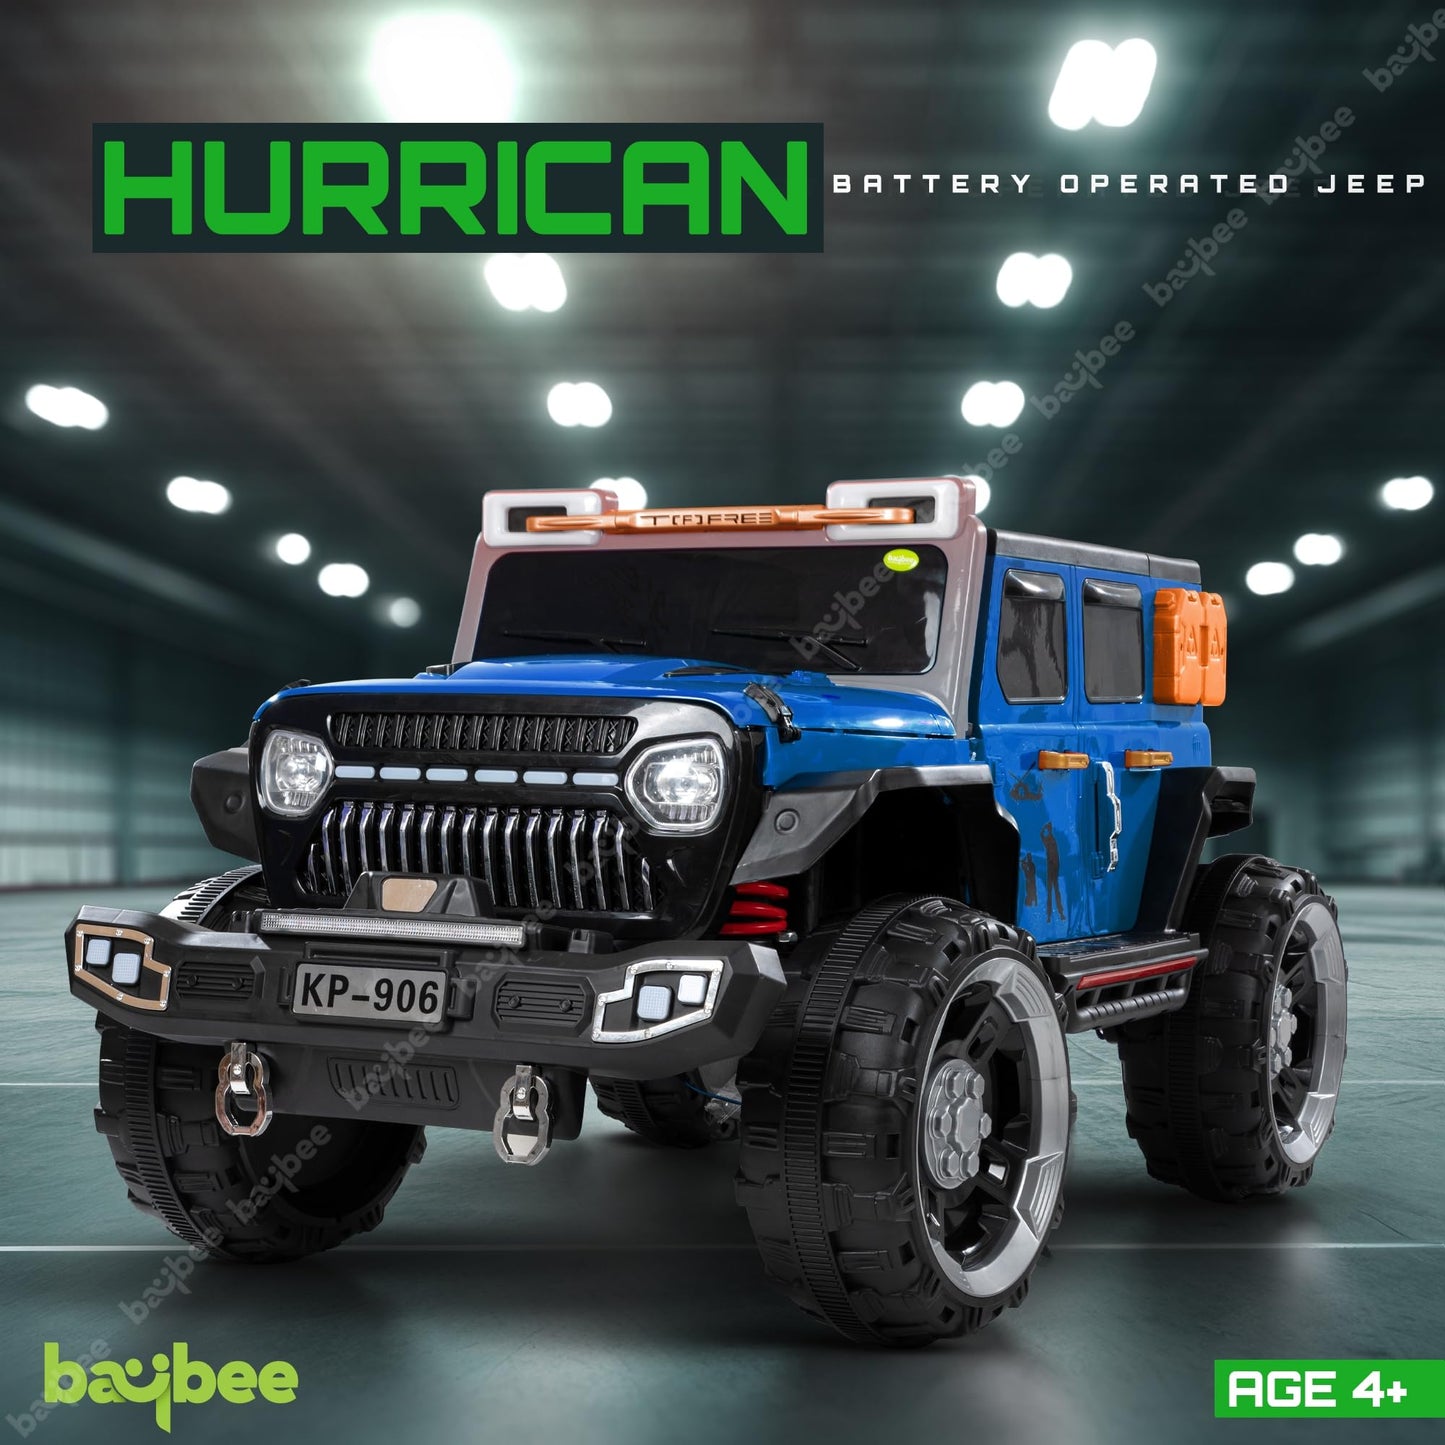 Baybee Hurricane Rechargeable Battery Operated Jeep for Kids Ride on Kids Car with Music & Light